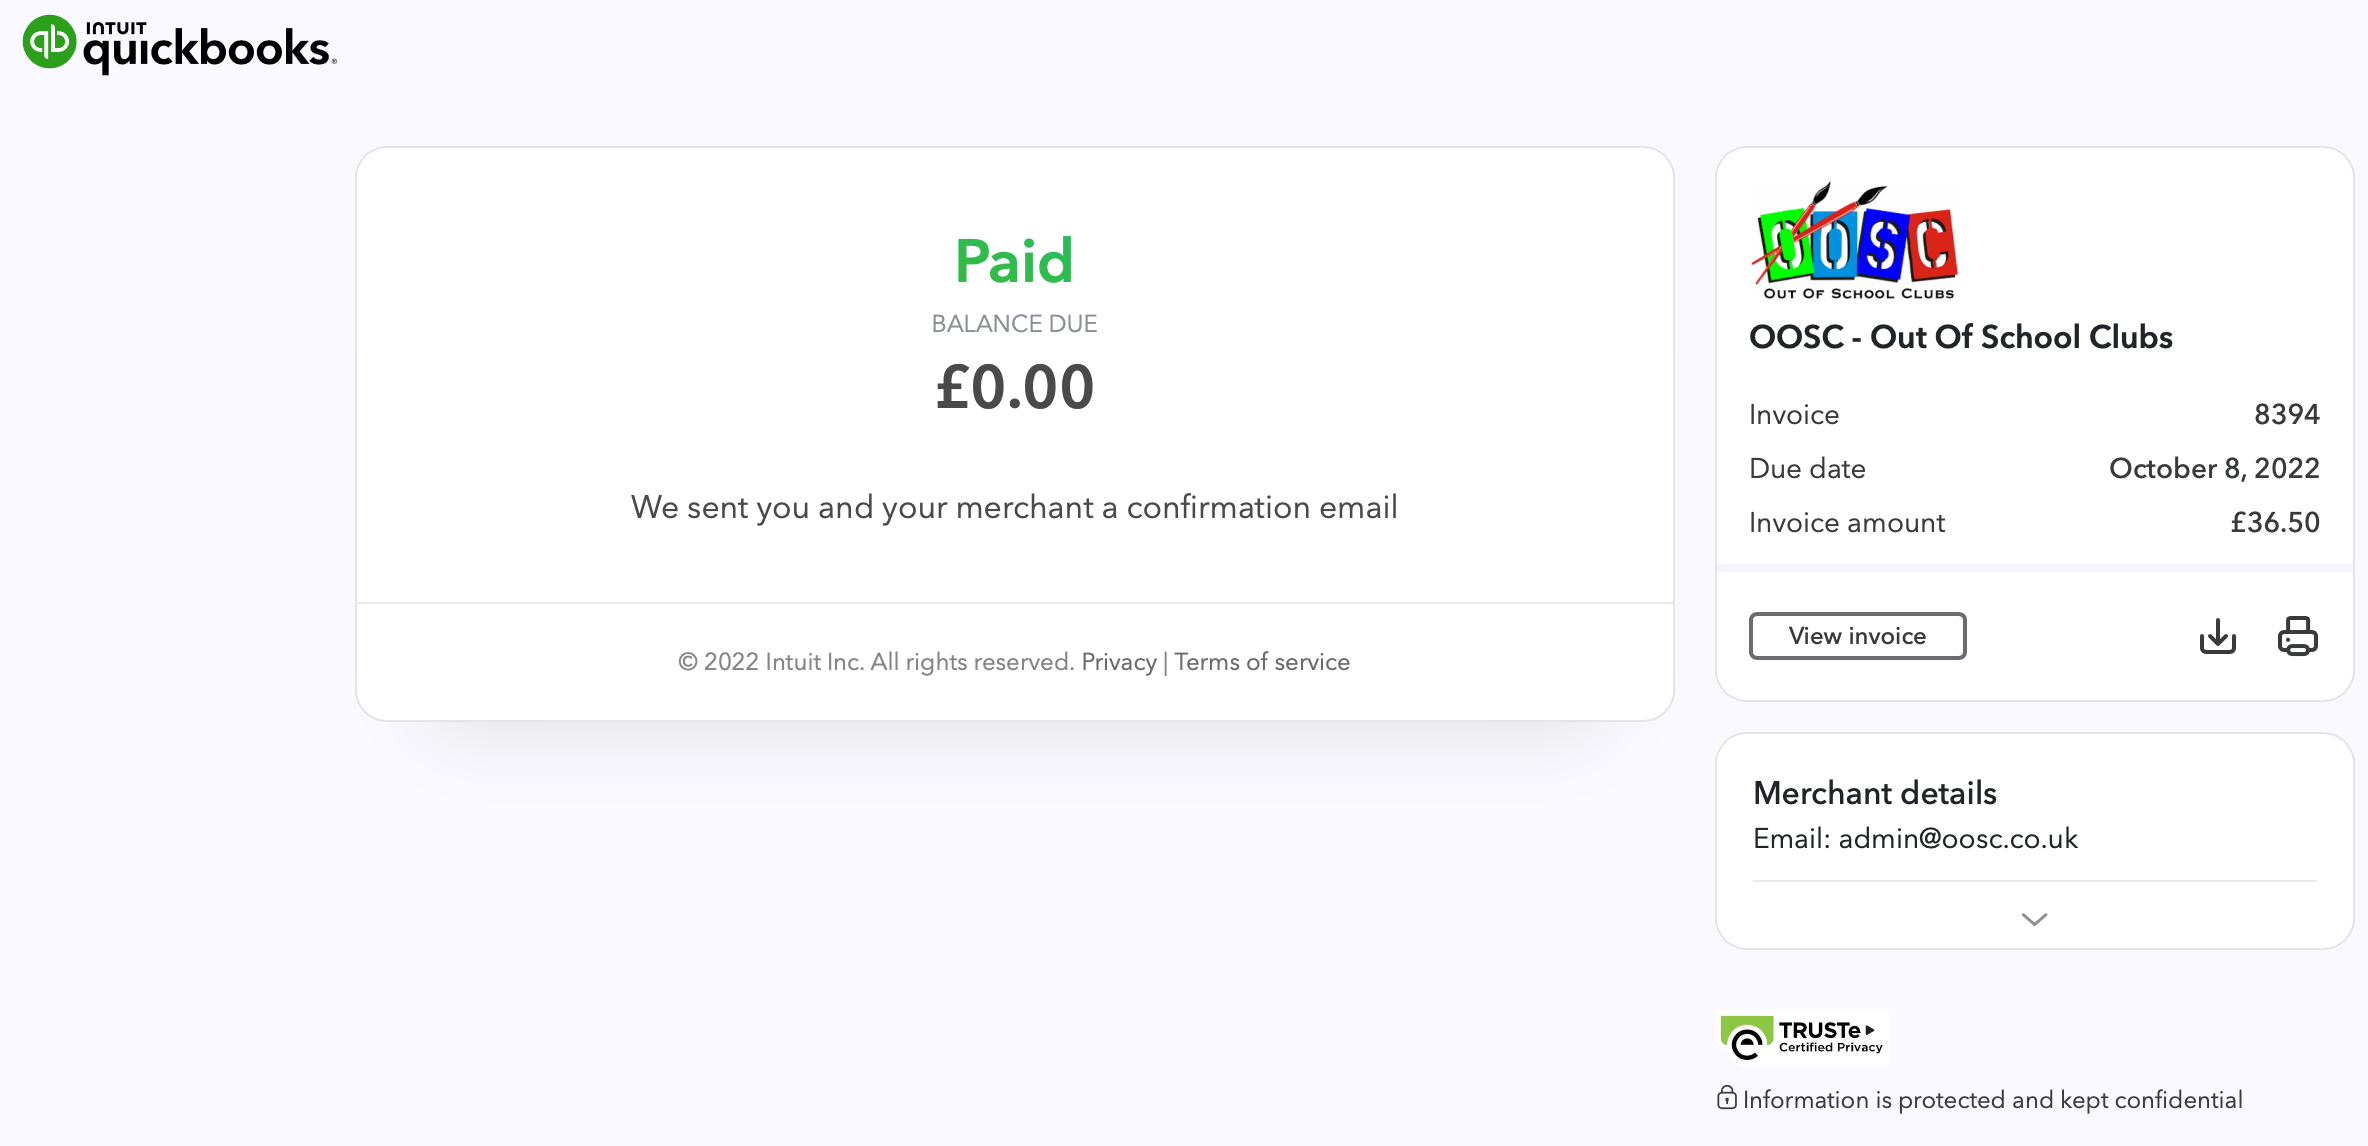 Paid Invoice Screen